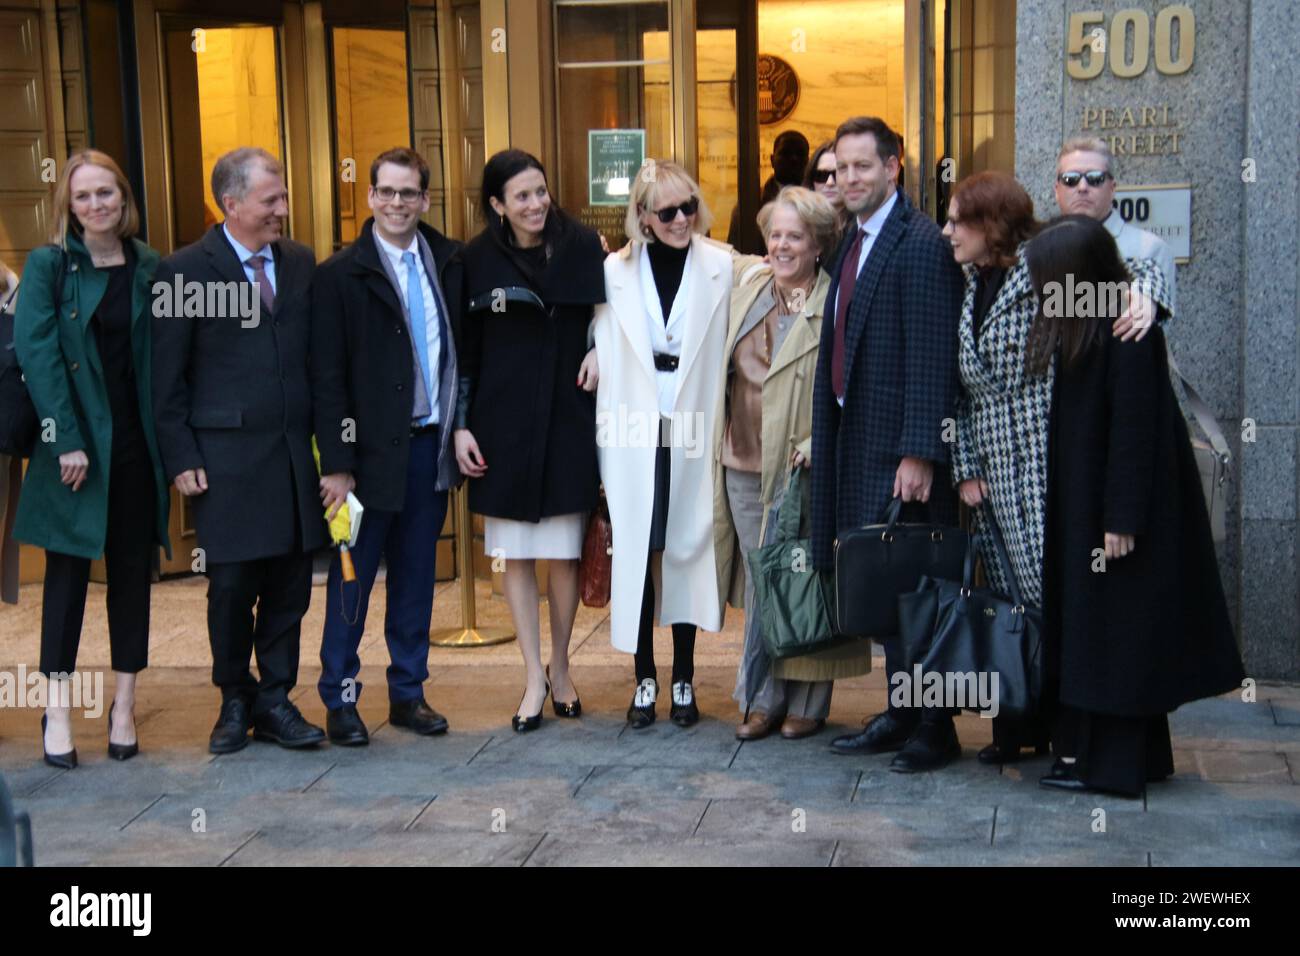 500 Pearl St, New York, NY 10007, USA. Jan 26, 2024. Plaintiff E Jean Carroll and legal team depart the courthouse in New York, where a jury had just awarded her over $83 Million in compensatory and punitive damages against President Donald Trump, who earlier in the day referred to the defamation lawsuit against him as “a hoax and a witch-hunt”.  Credit: ©Julia Mineeva/EGBN TV News/Alamy Live News Stock Photo